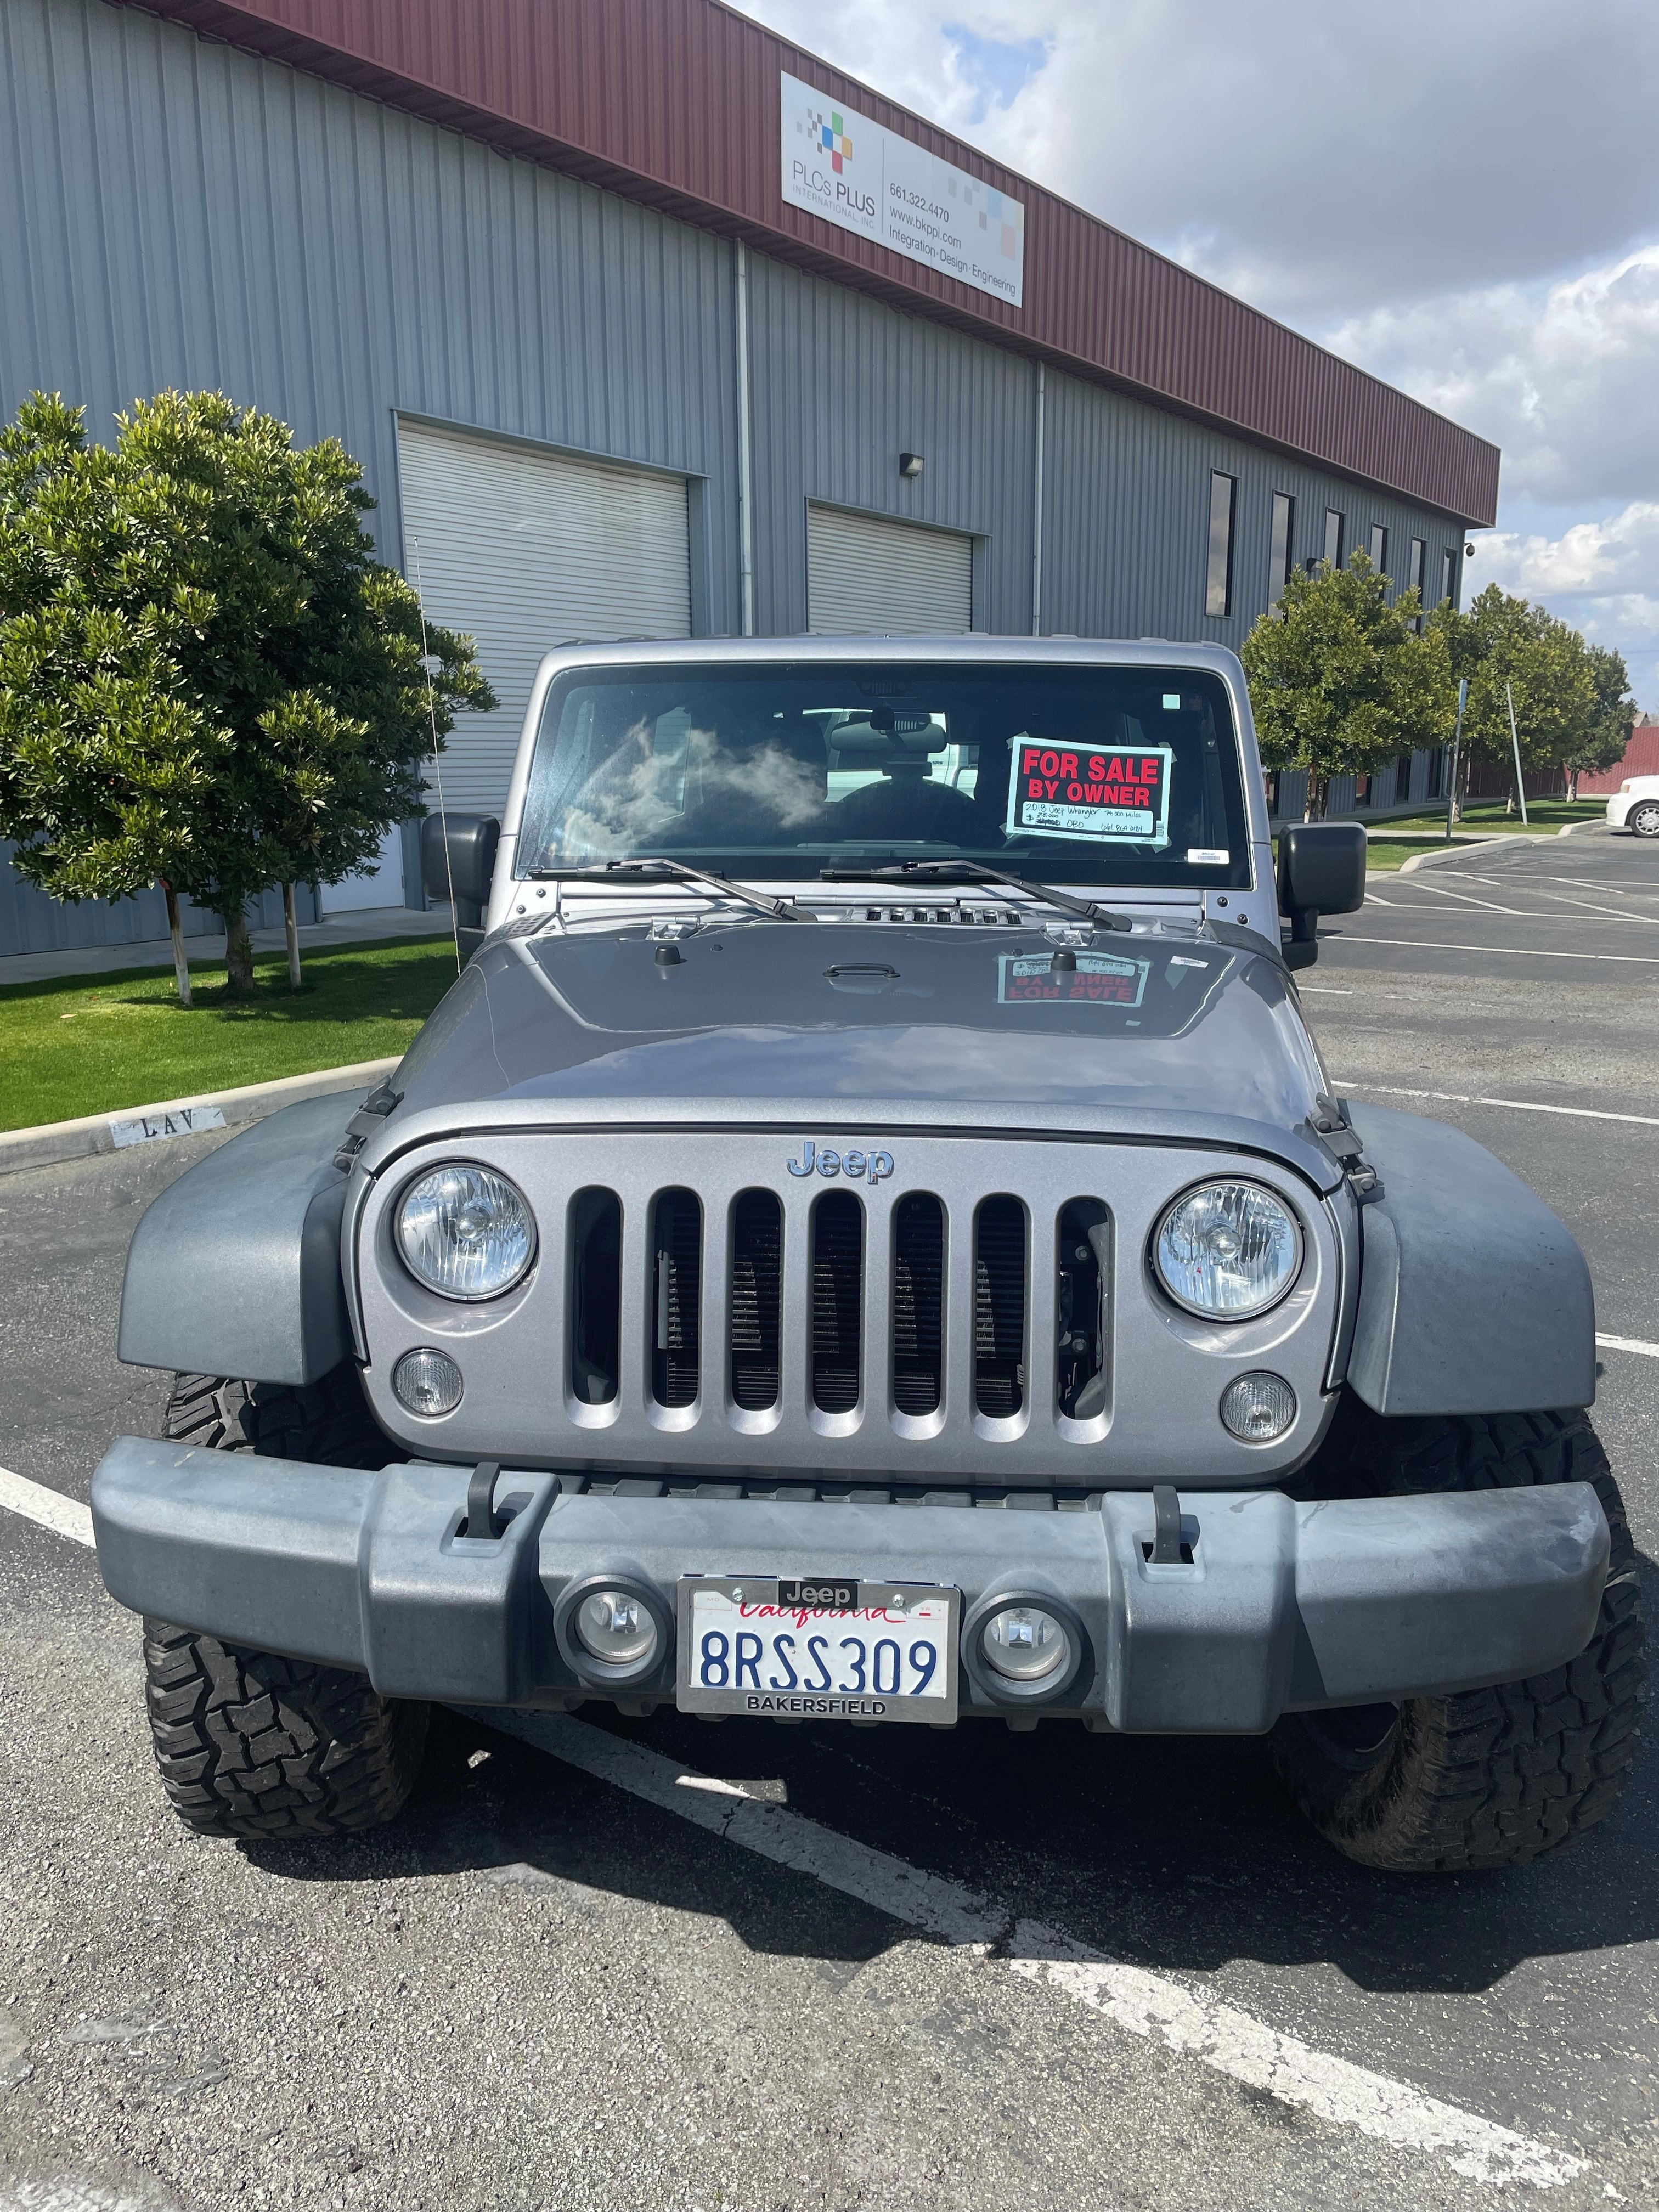 Used 2018 Jeep Wrangler for Sale Near Me in Bakersfield, CA - Autotrader